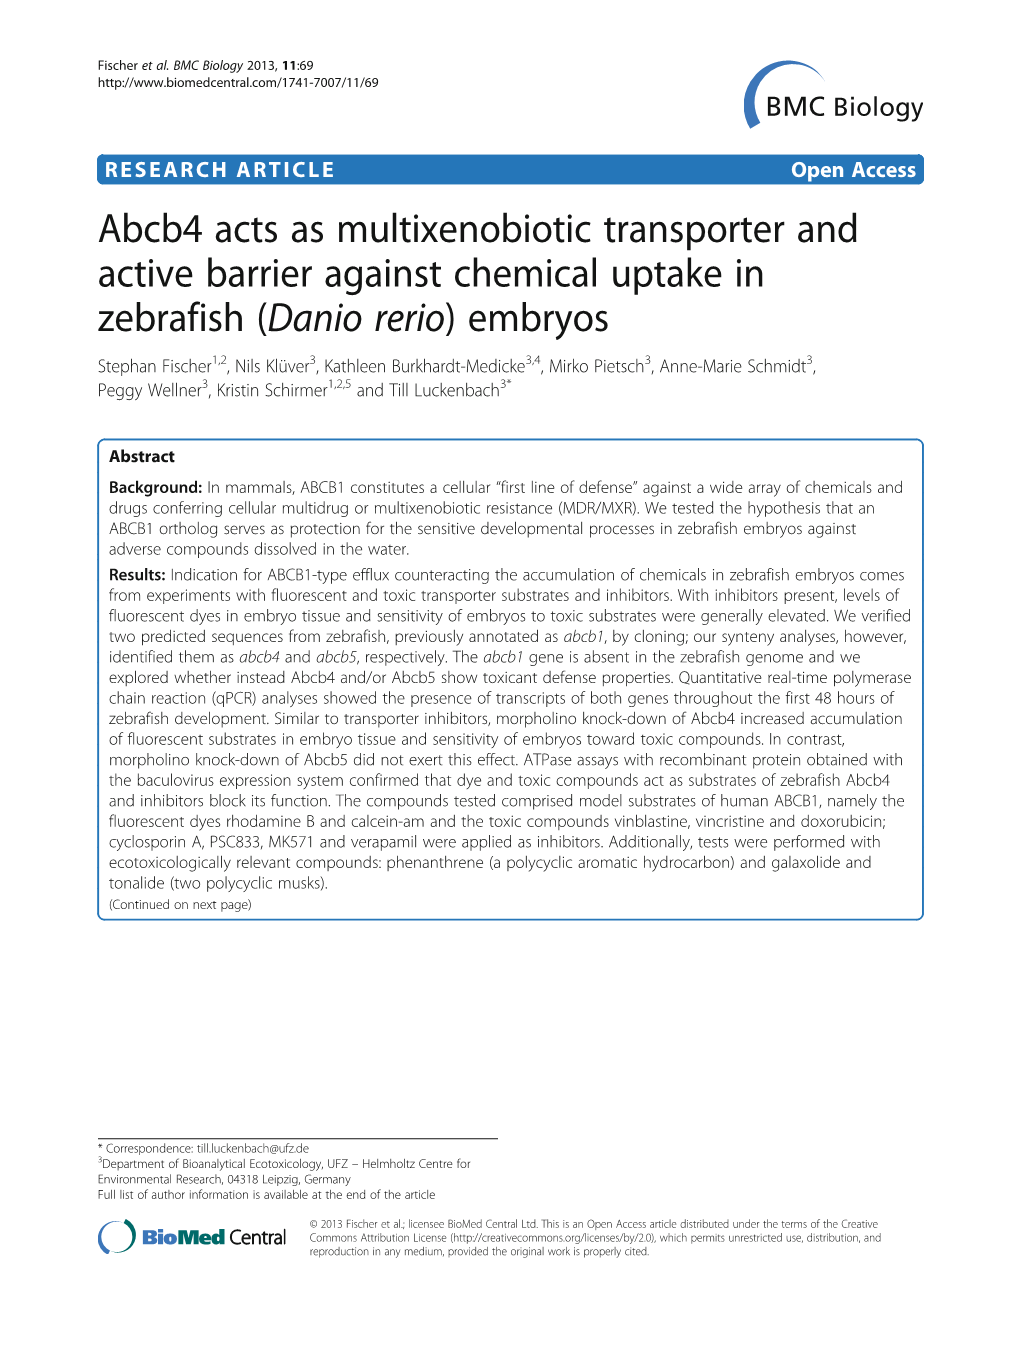 Abcb4 Acts As Multixenobiotic Transporter and Active Barrier